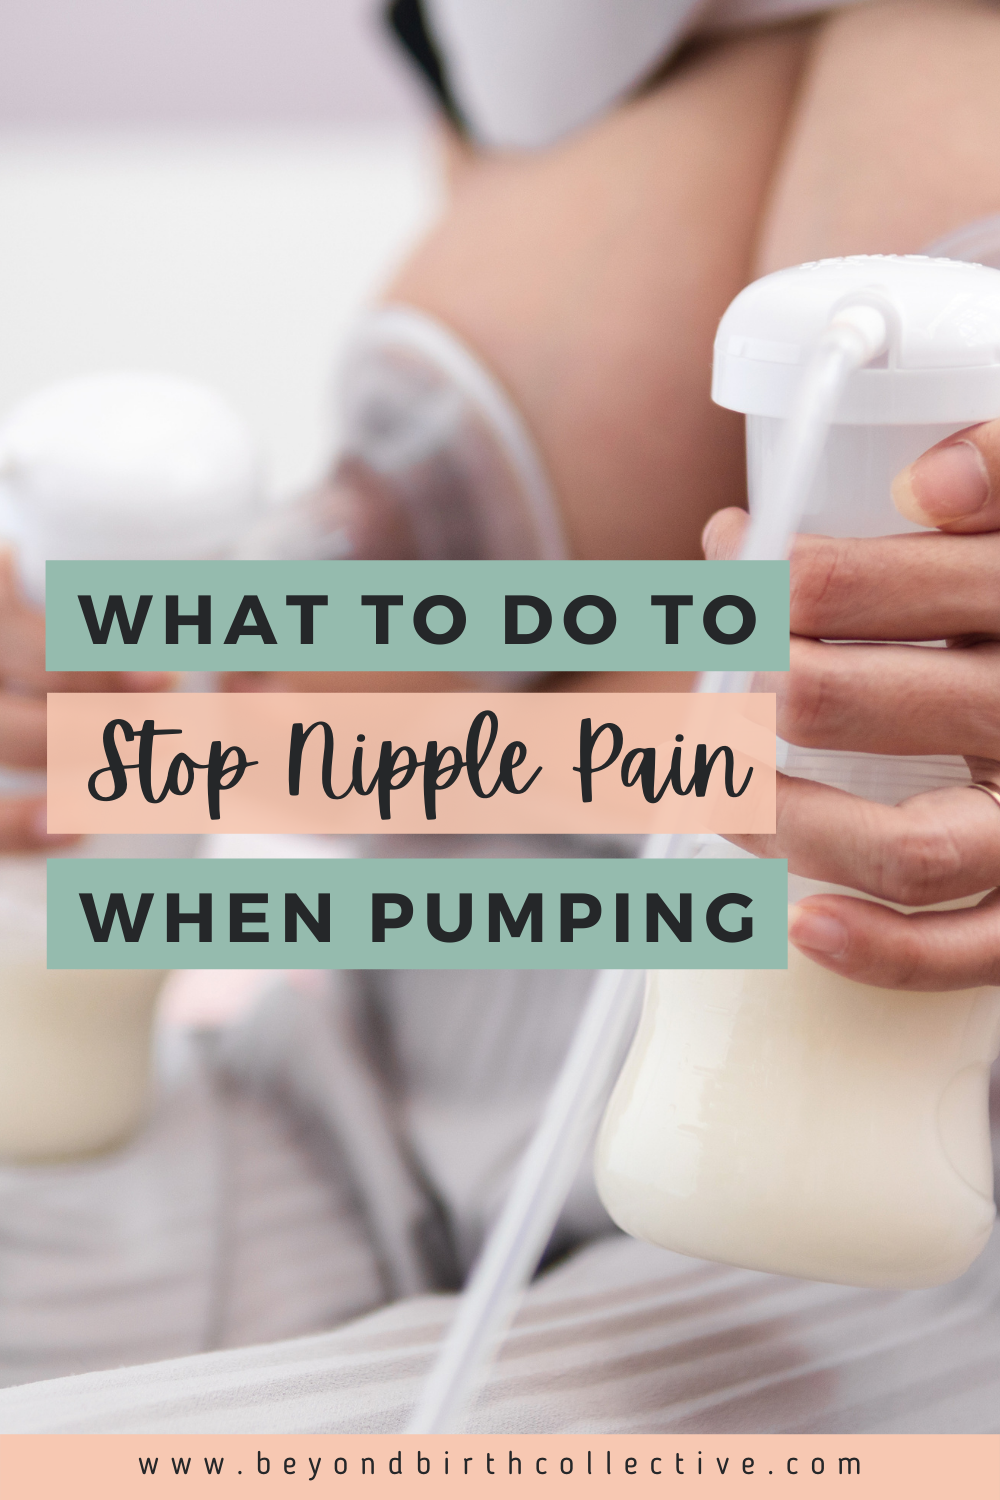 What to Do to Stop Nipple Pain When Pumping — Beyond Birth Collective